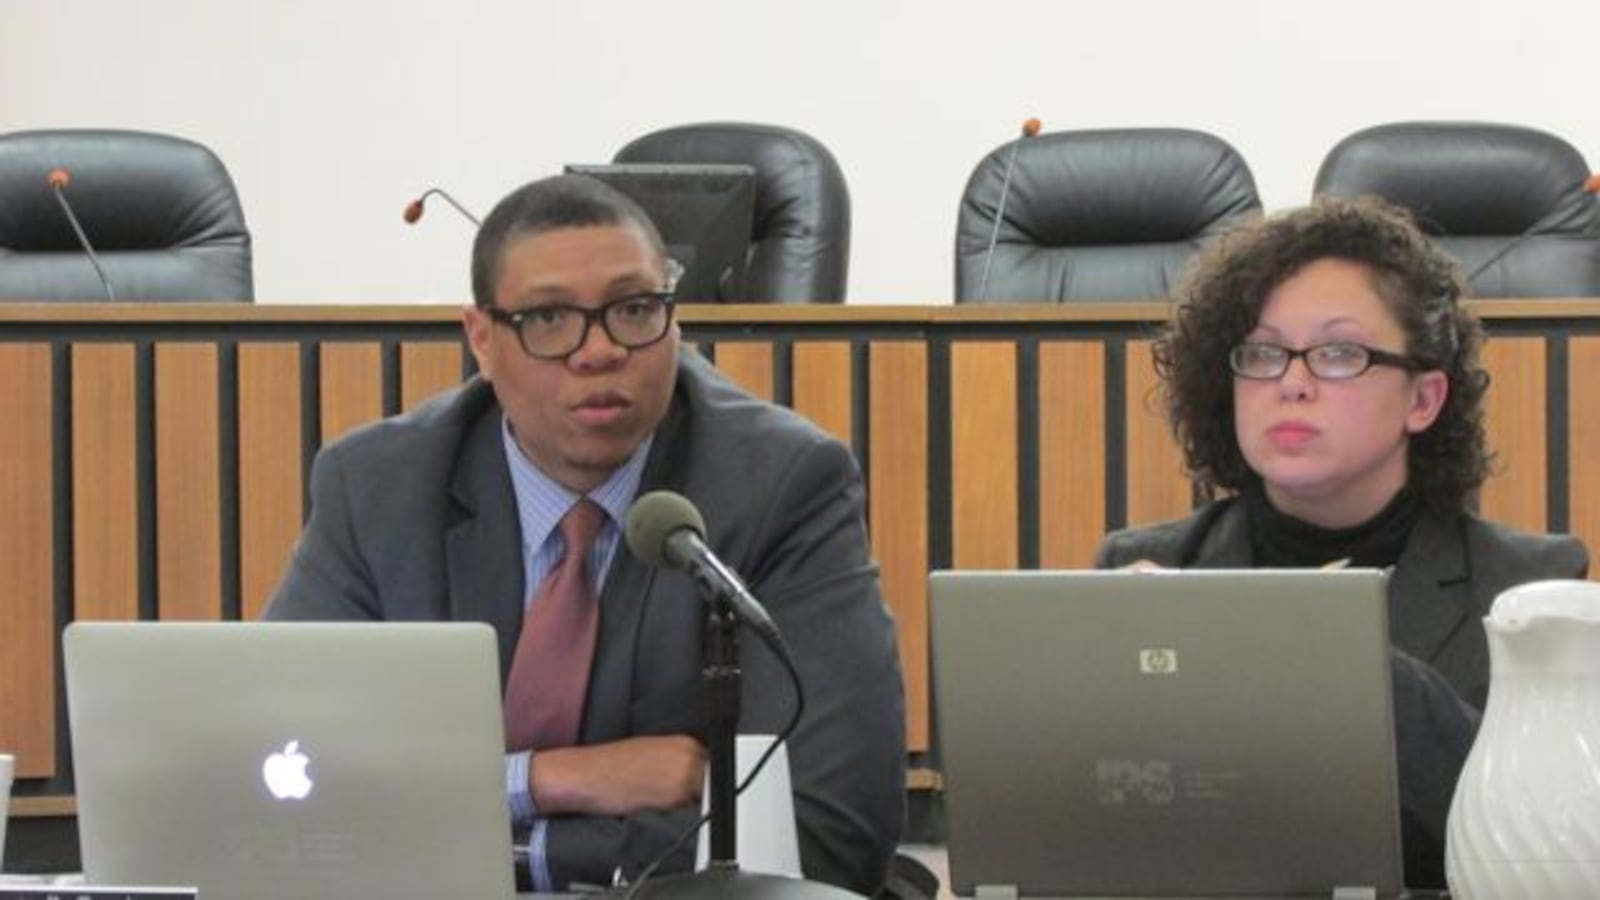 IPS Superintendent Lewis Ferebee and board member Gayle Cosby at Tuesday's meeting. (Scott Elliott)